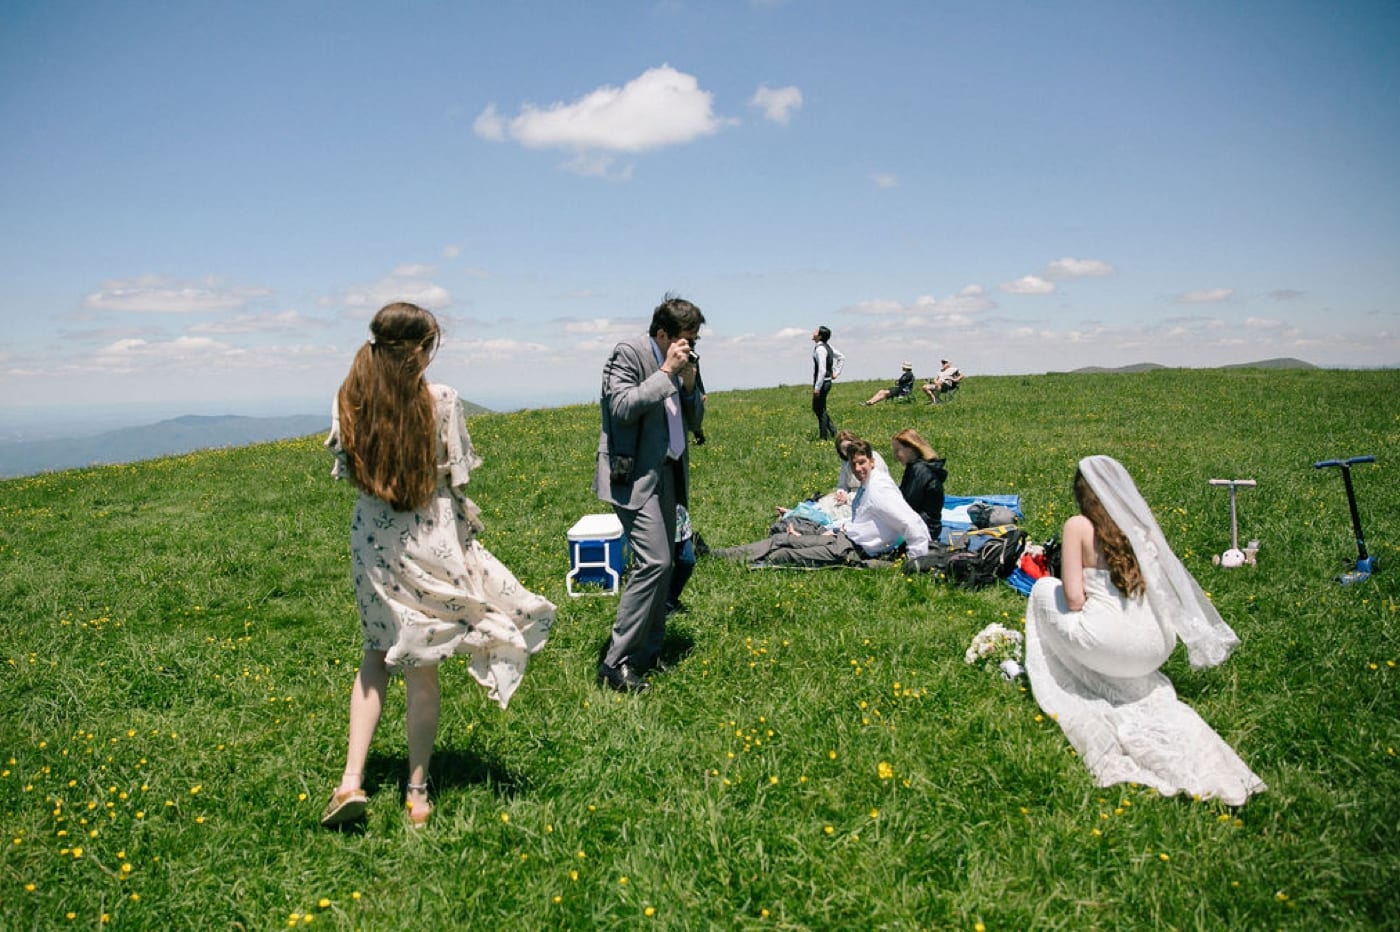 Celebrating a casual COVID wedding on Max patch